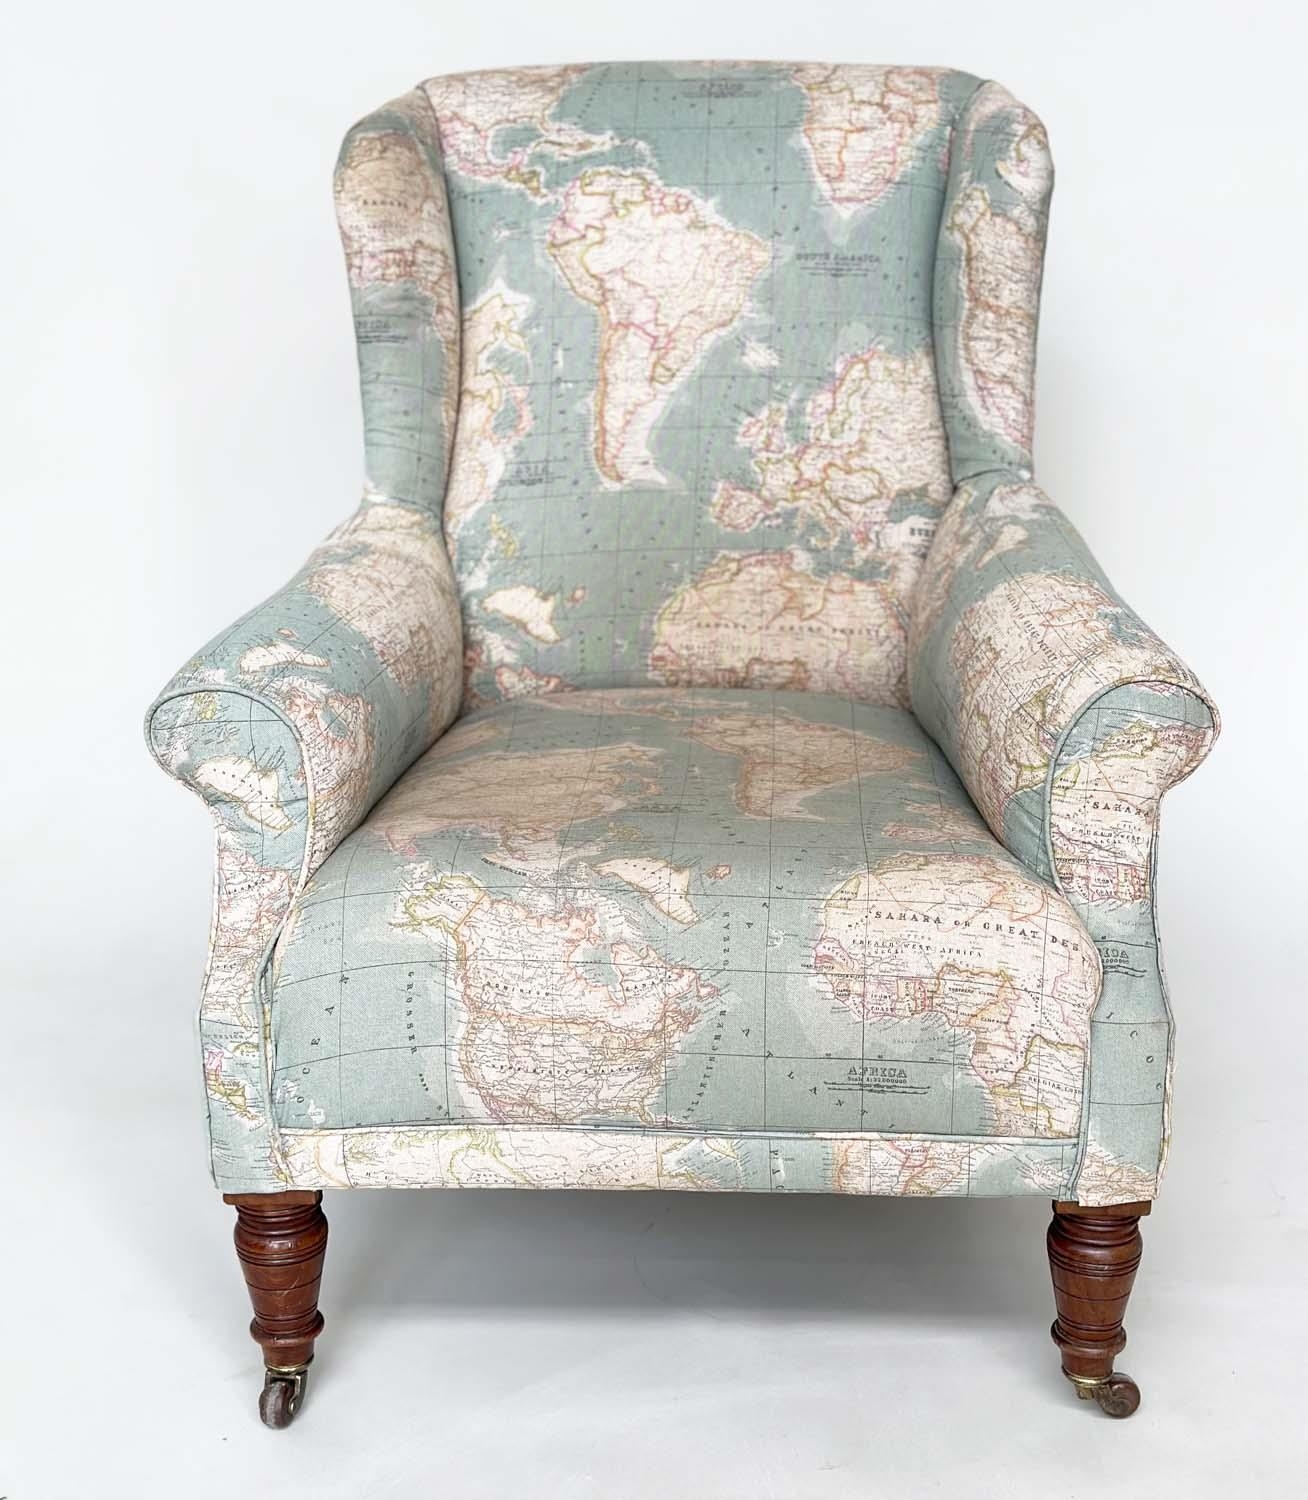 WING ARMCHAIR, Victorian walnut with circa 1900 World Atlas printed fabric upholstery scroll arms - Image 11 of 12